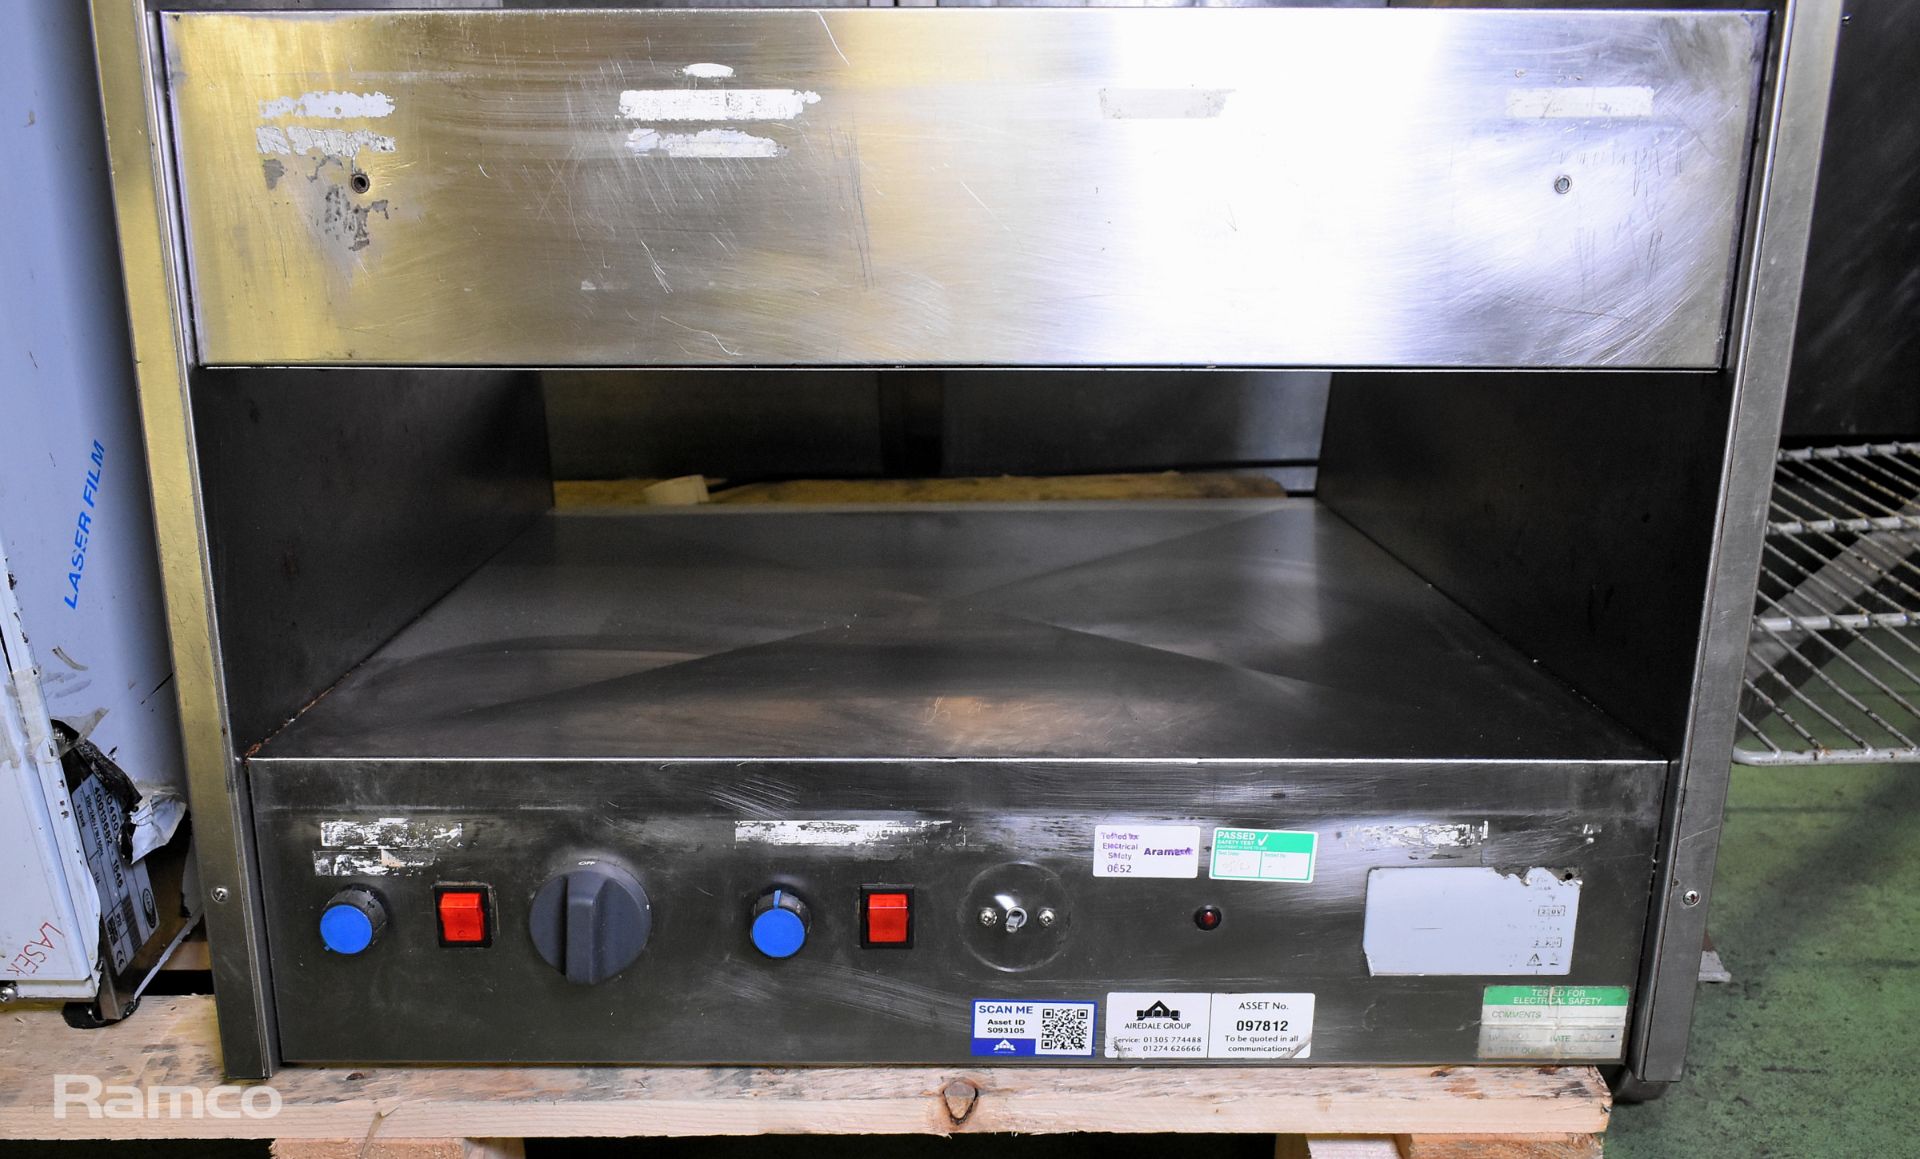 Stainless steel 2 tier heated food chute - W 700 x D 770 x H 780mm - Image 2 of 7